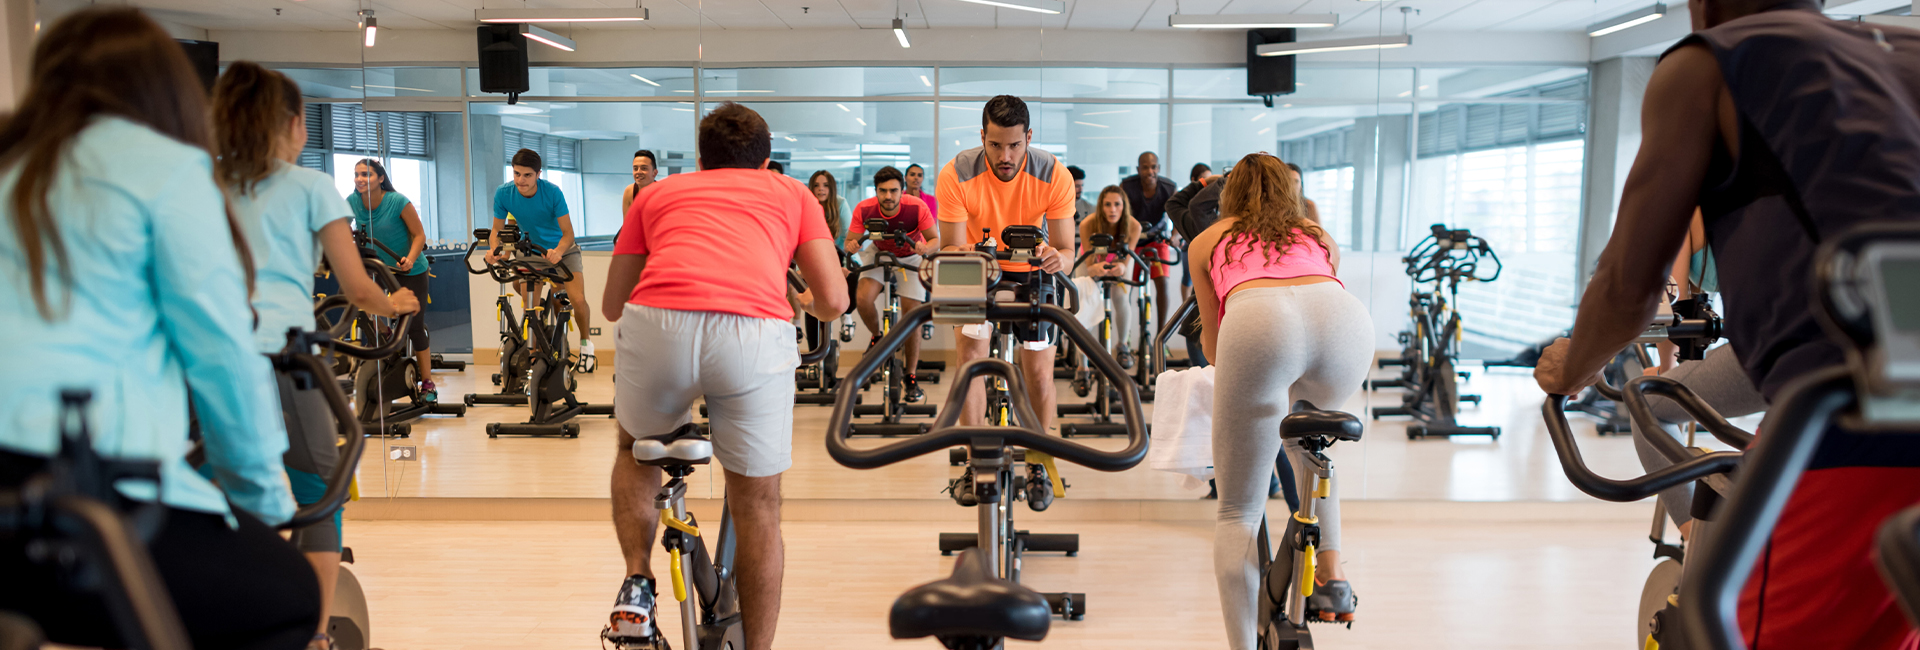 spin instructor leading cycling gym group class